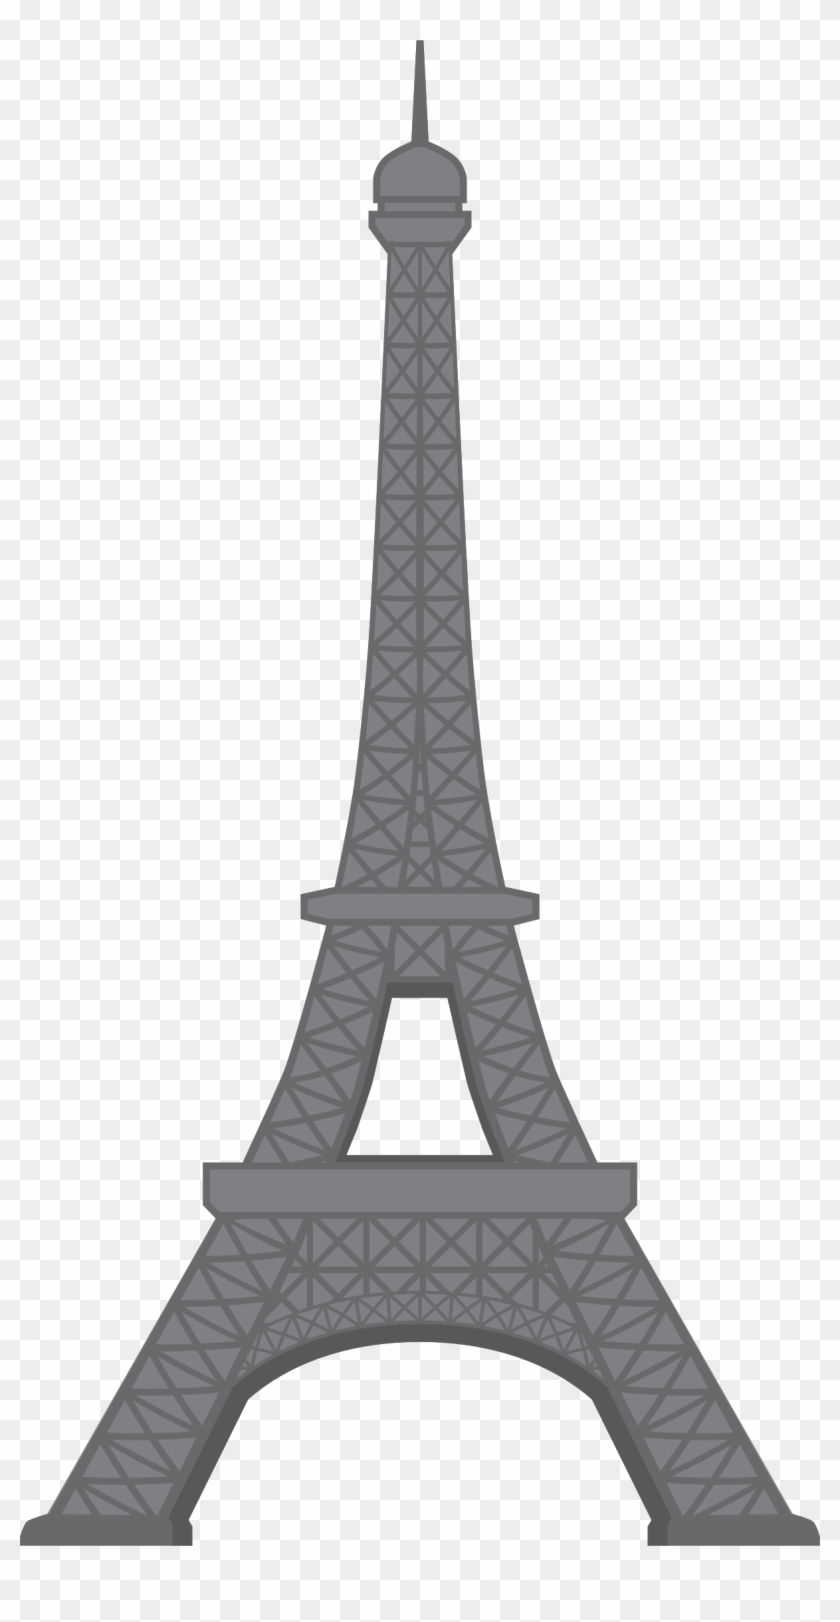 Eiffel Tower Full Hd Images - Eiffel Tower Icon Png #424272